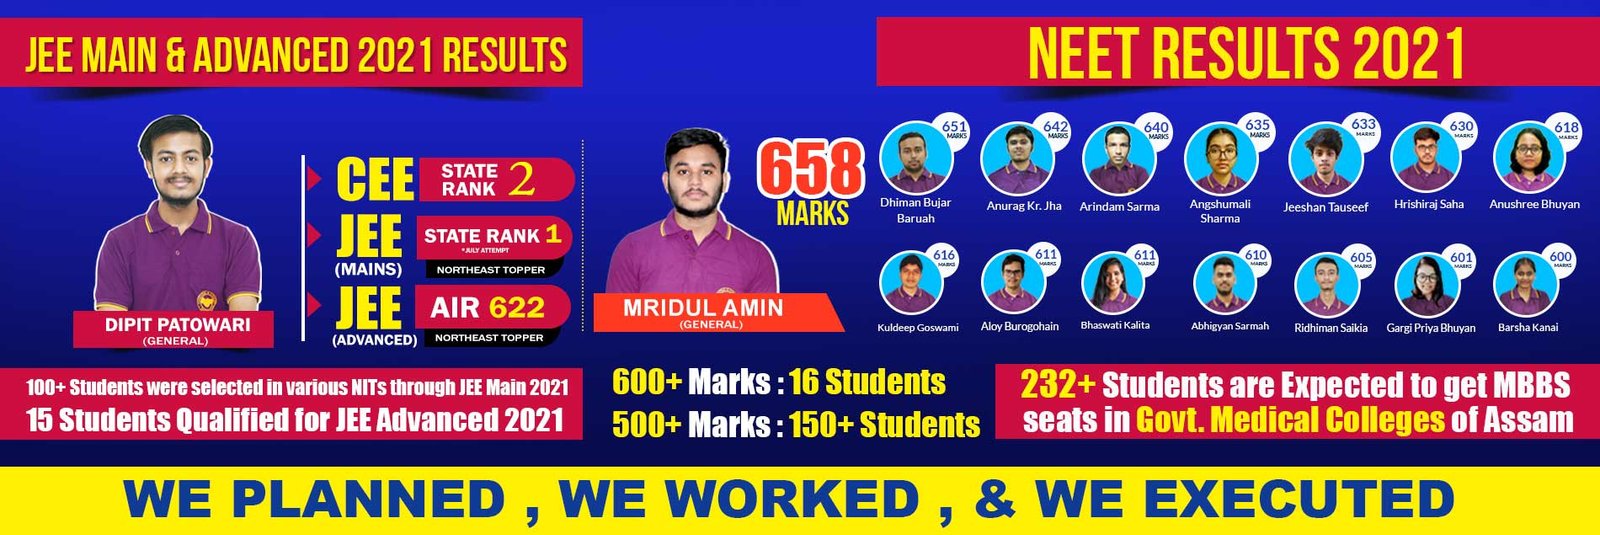 JEE and Advanced 2021 results